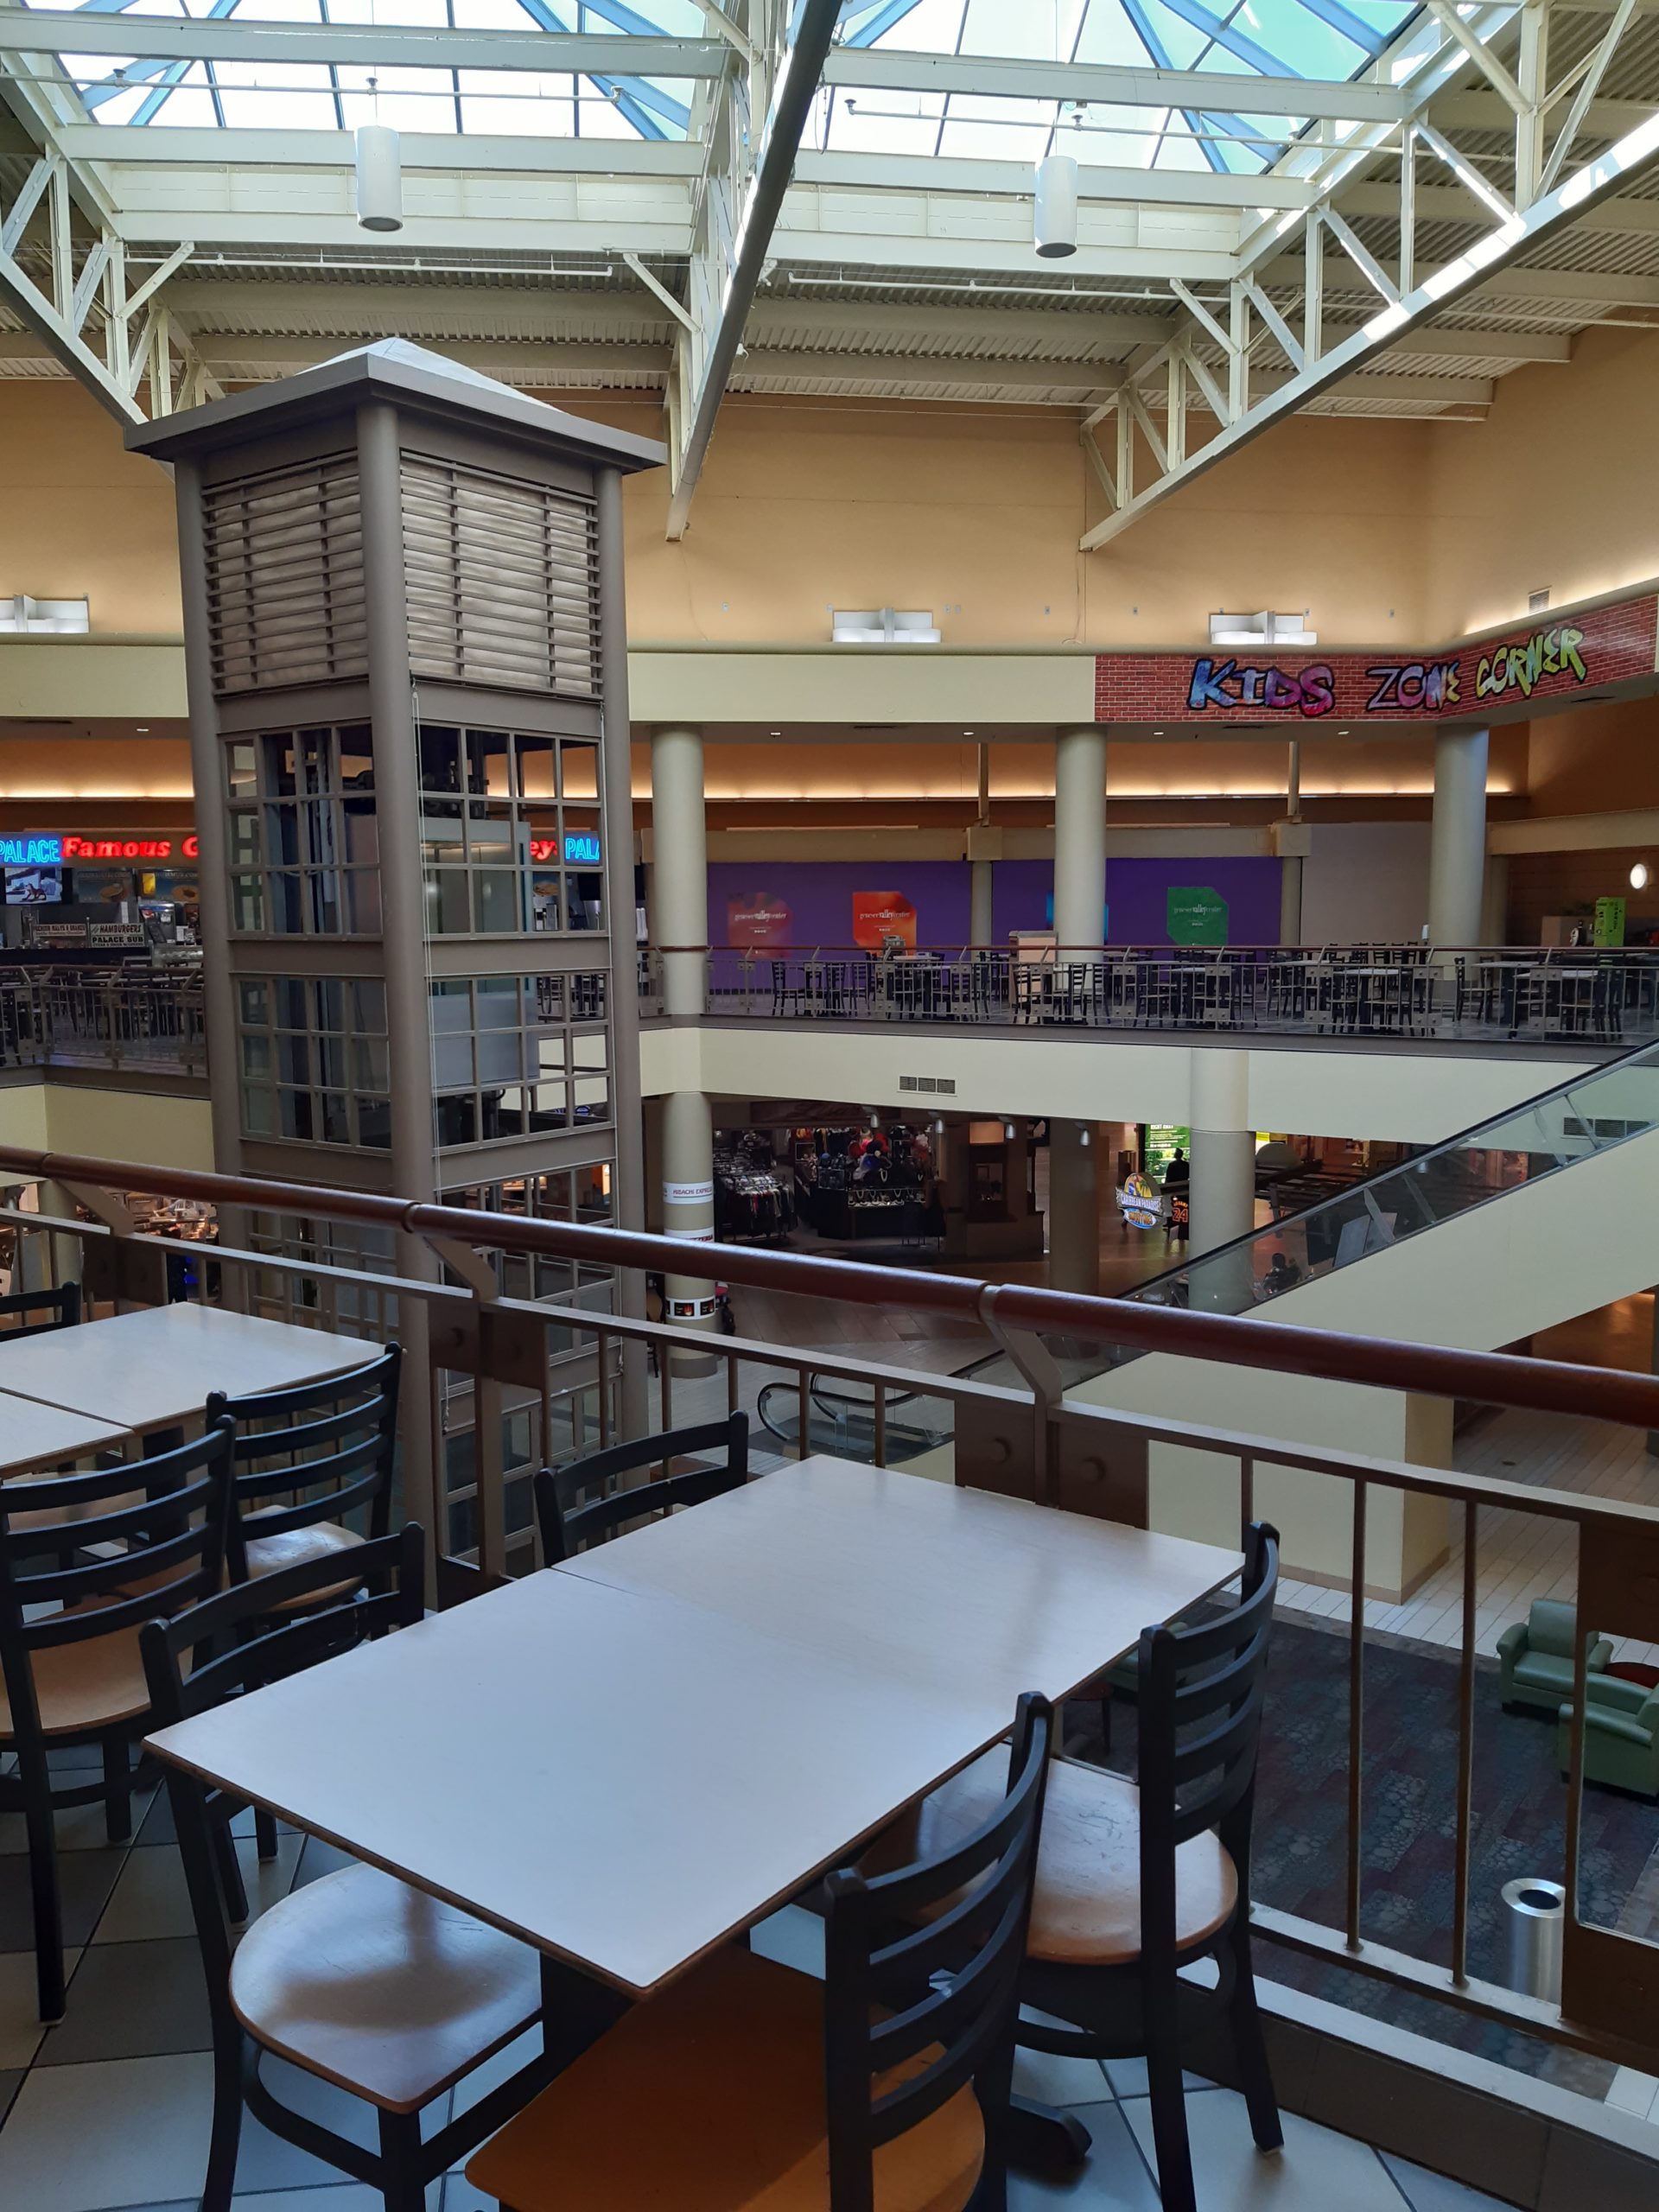 Genesee Valley Mall leasing exec knows of no plans to close so far